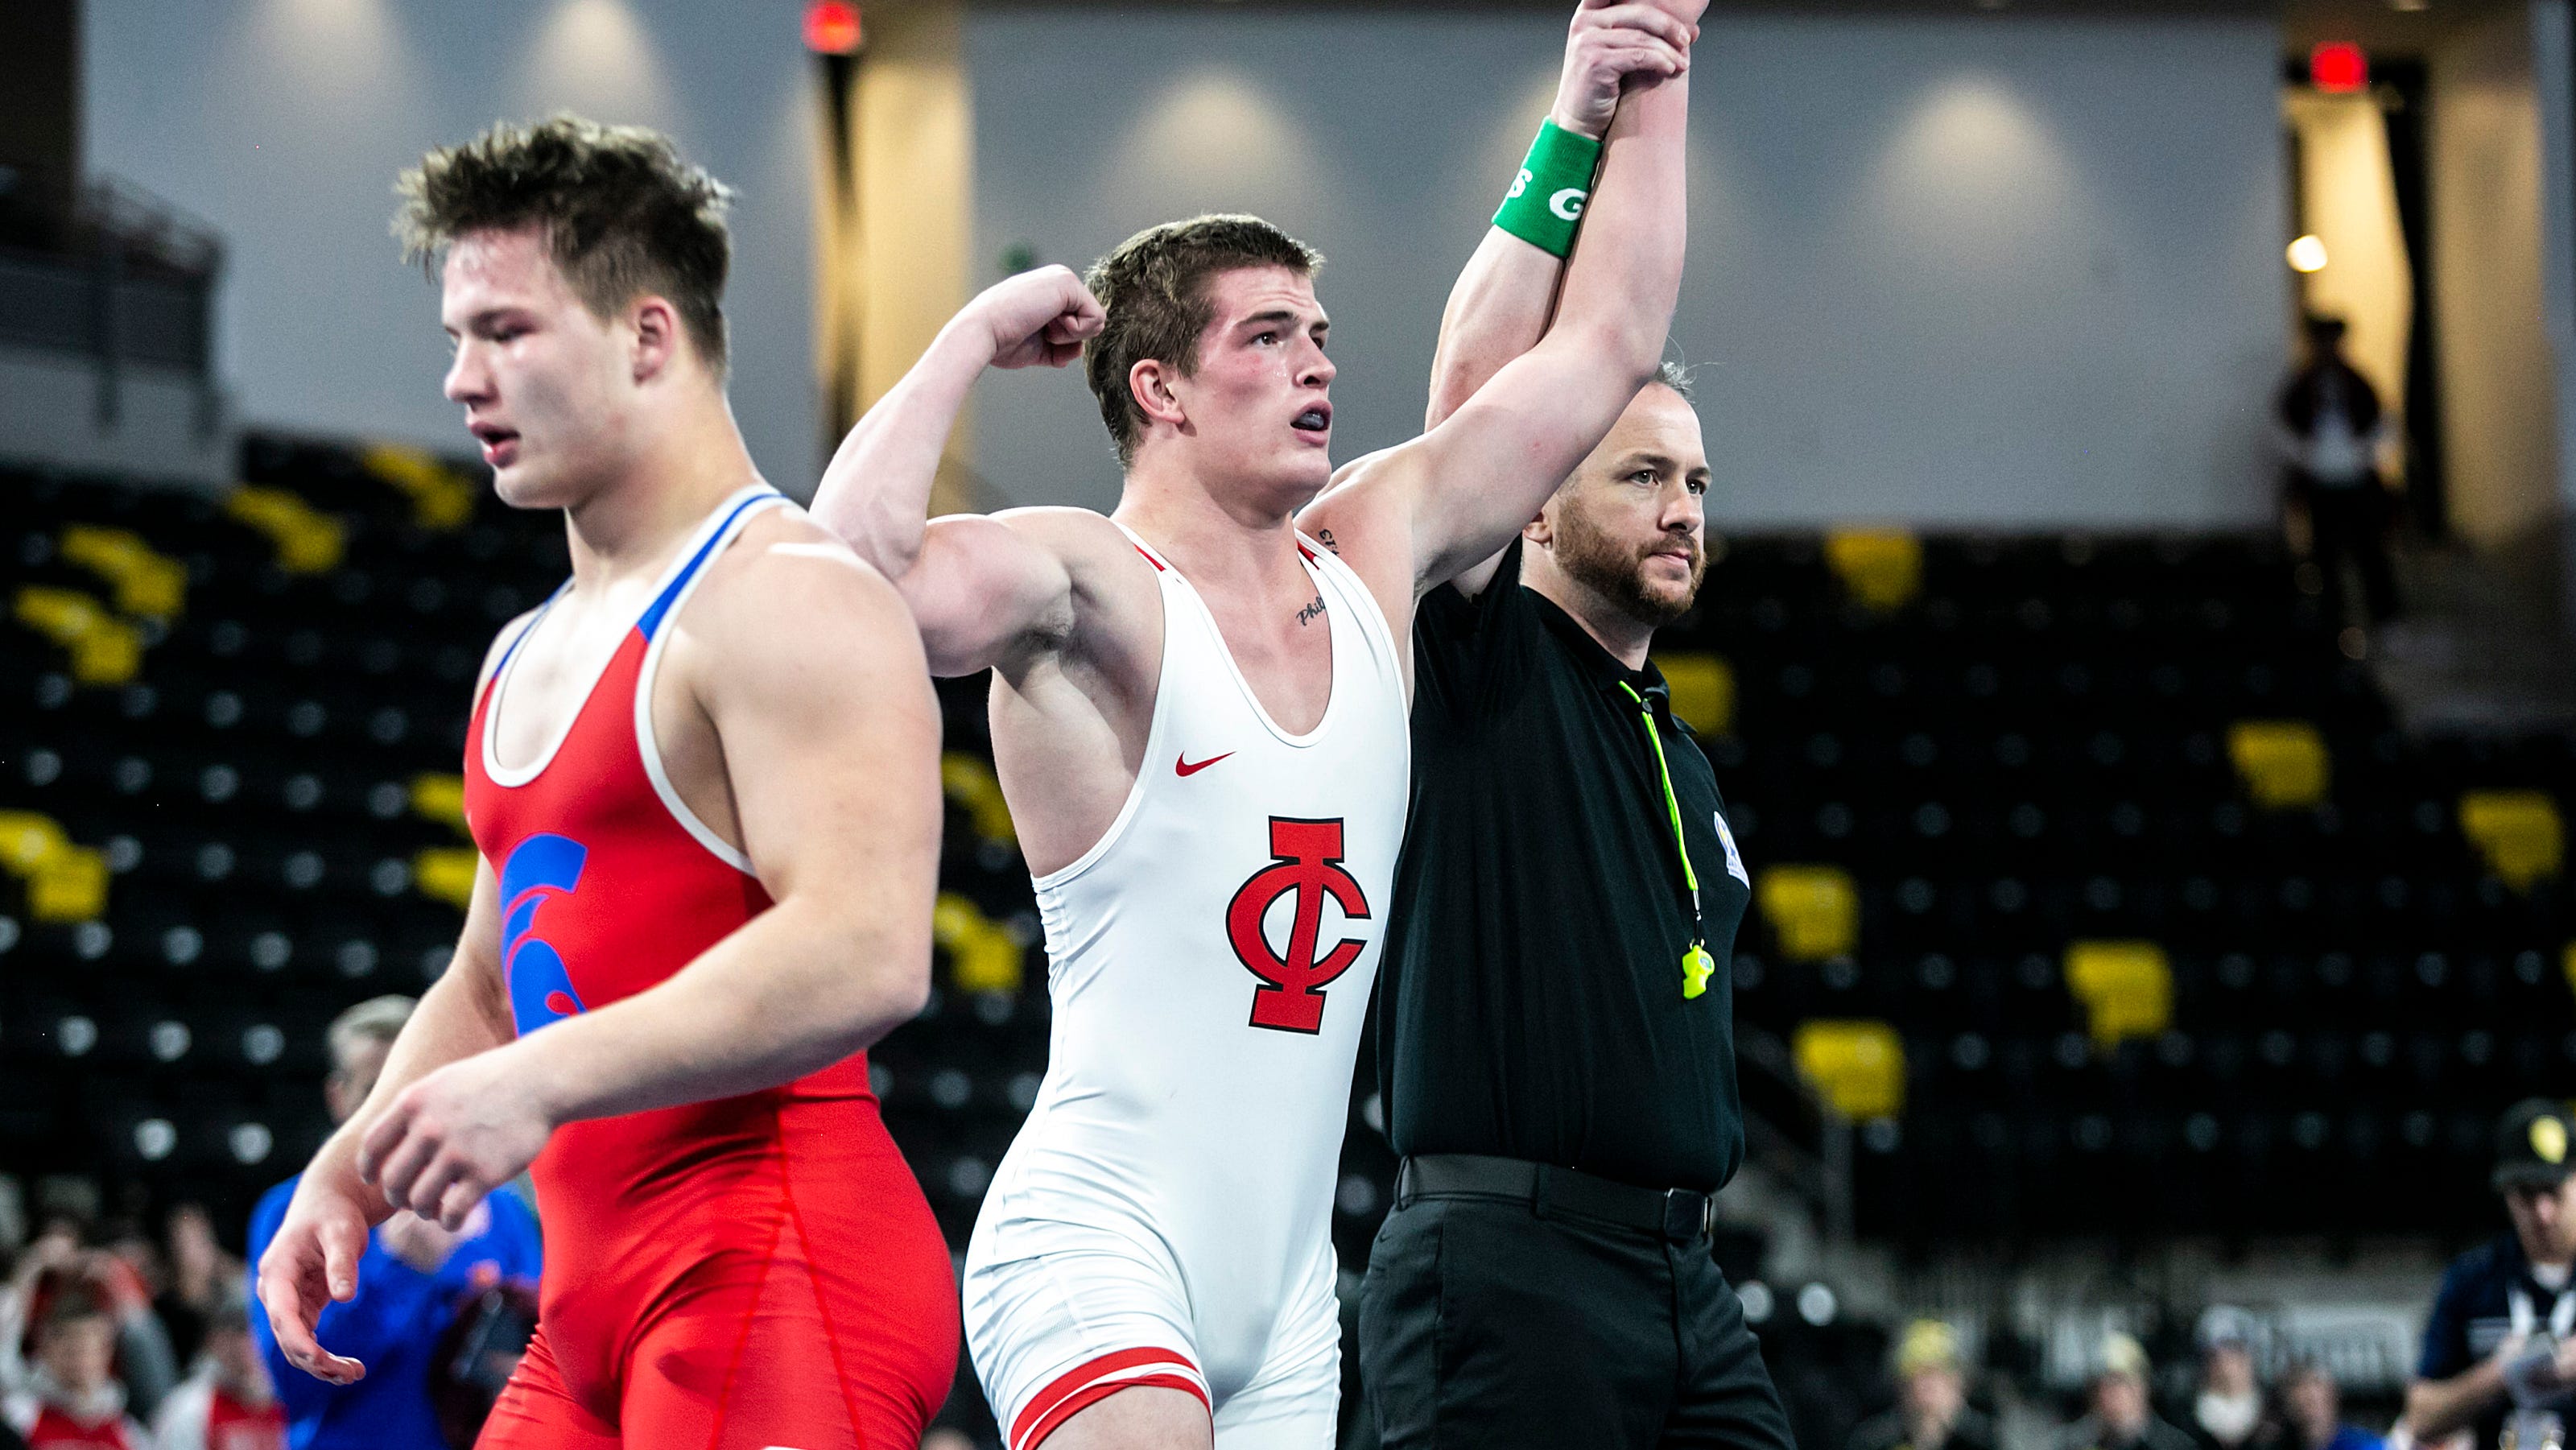 Top 15 football recruits competing in the Iowa state wrestling meet